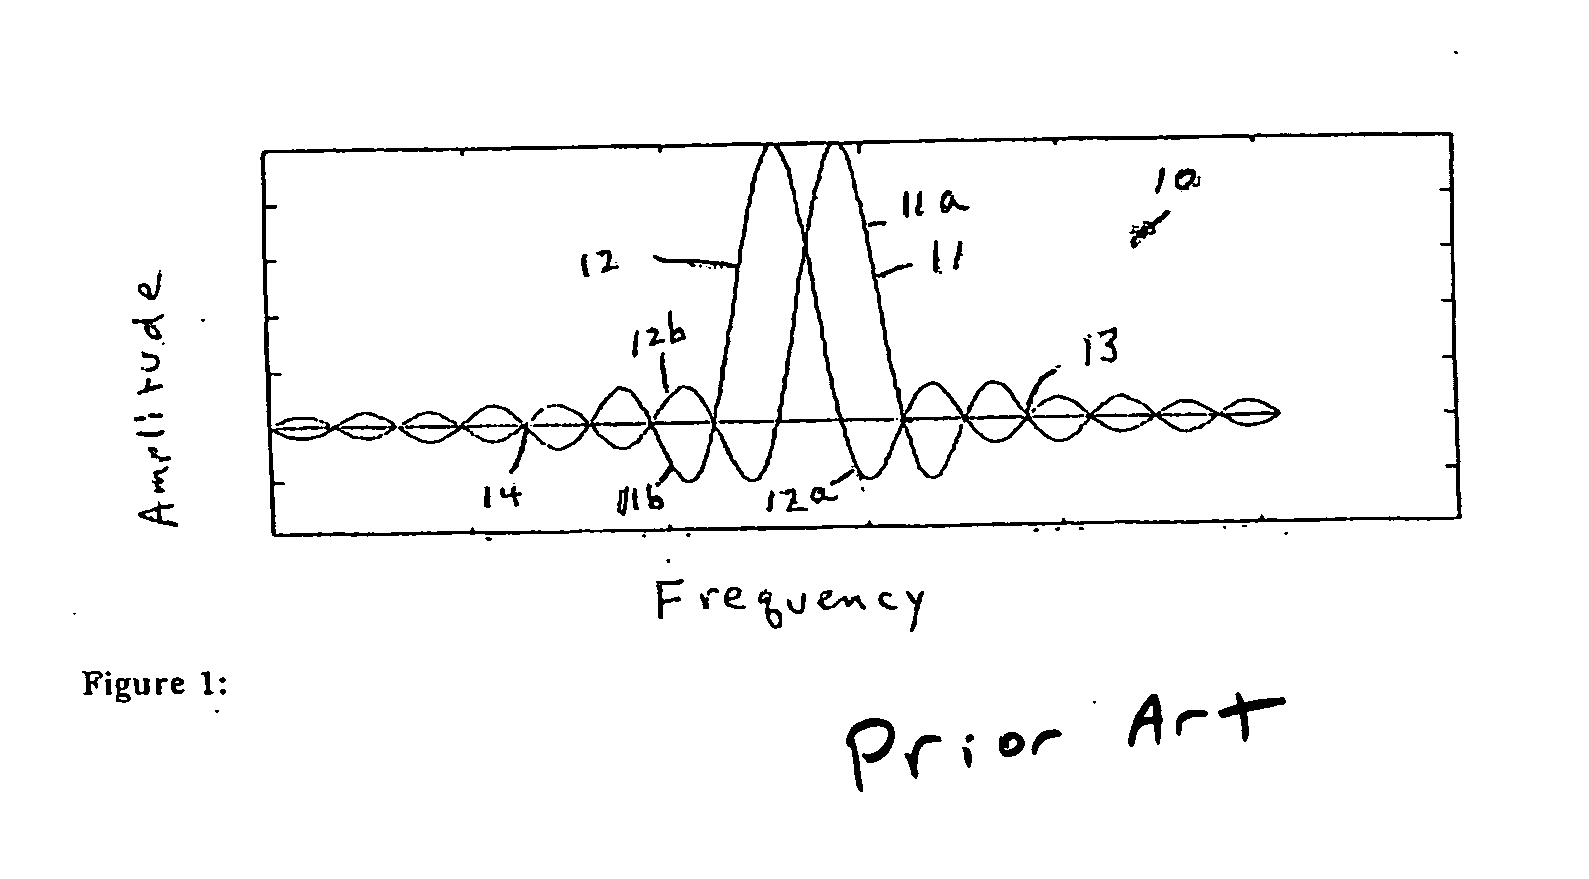 Electromagnetic matched filter based multiple access communications systems